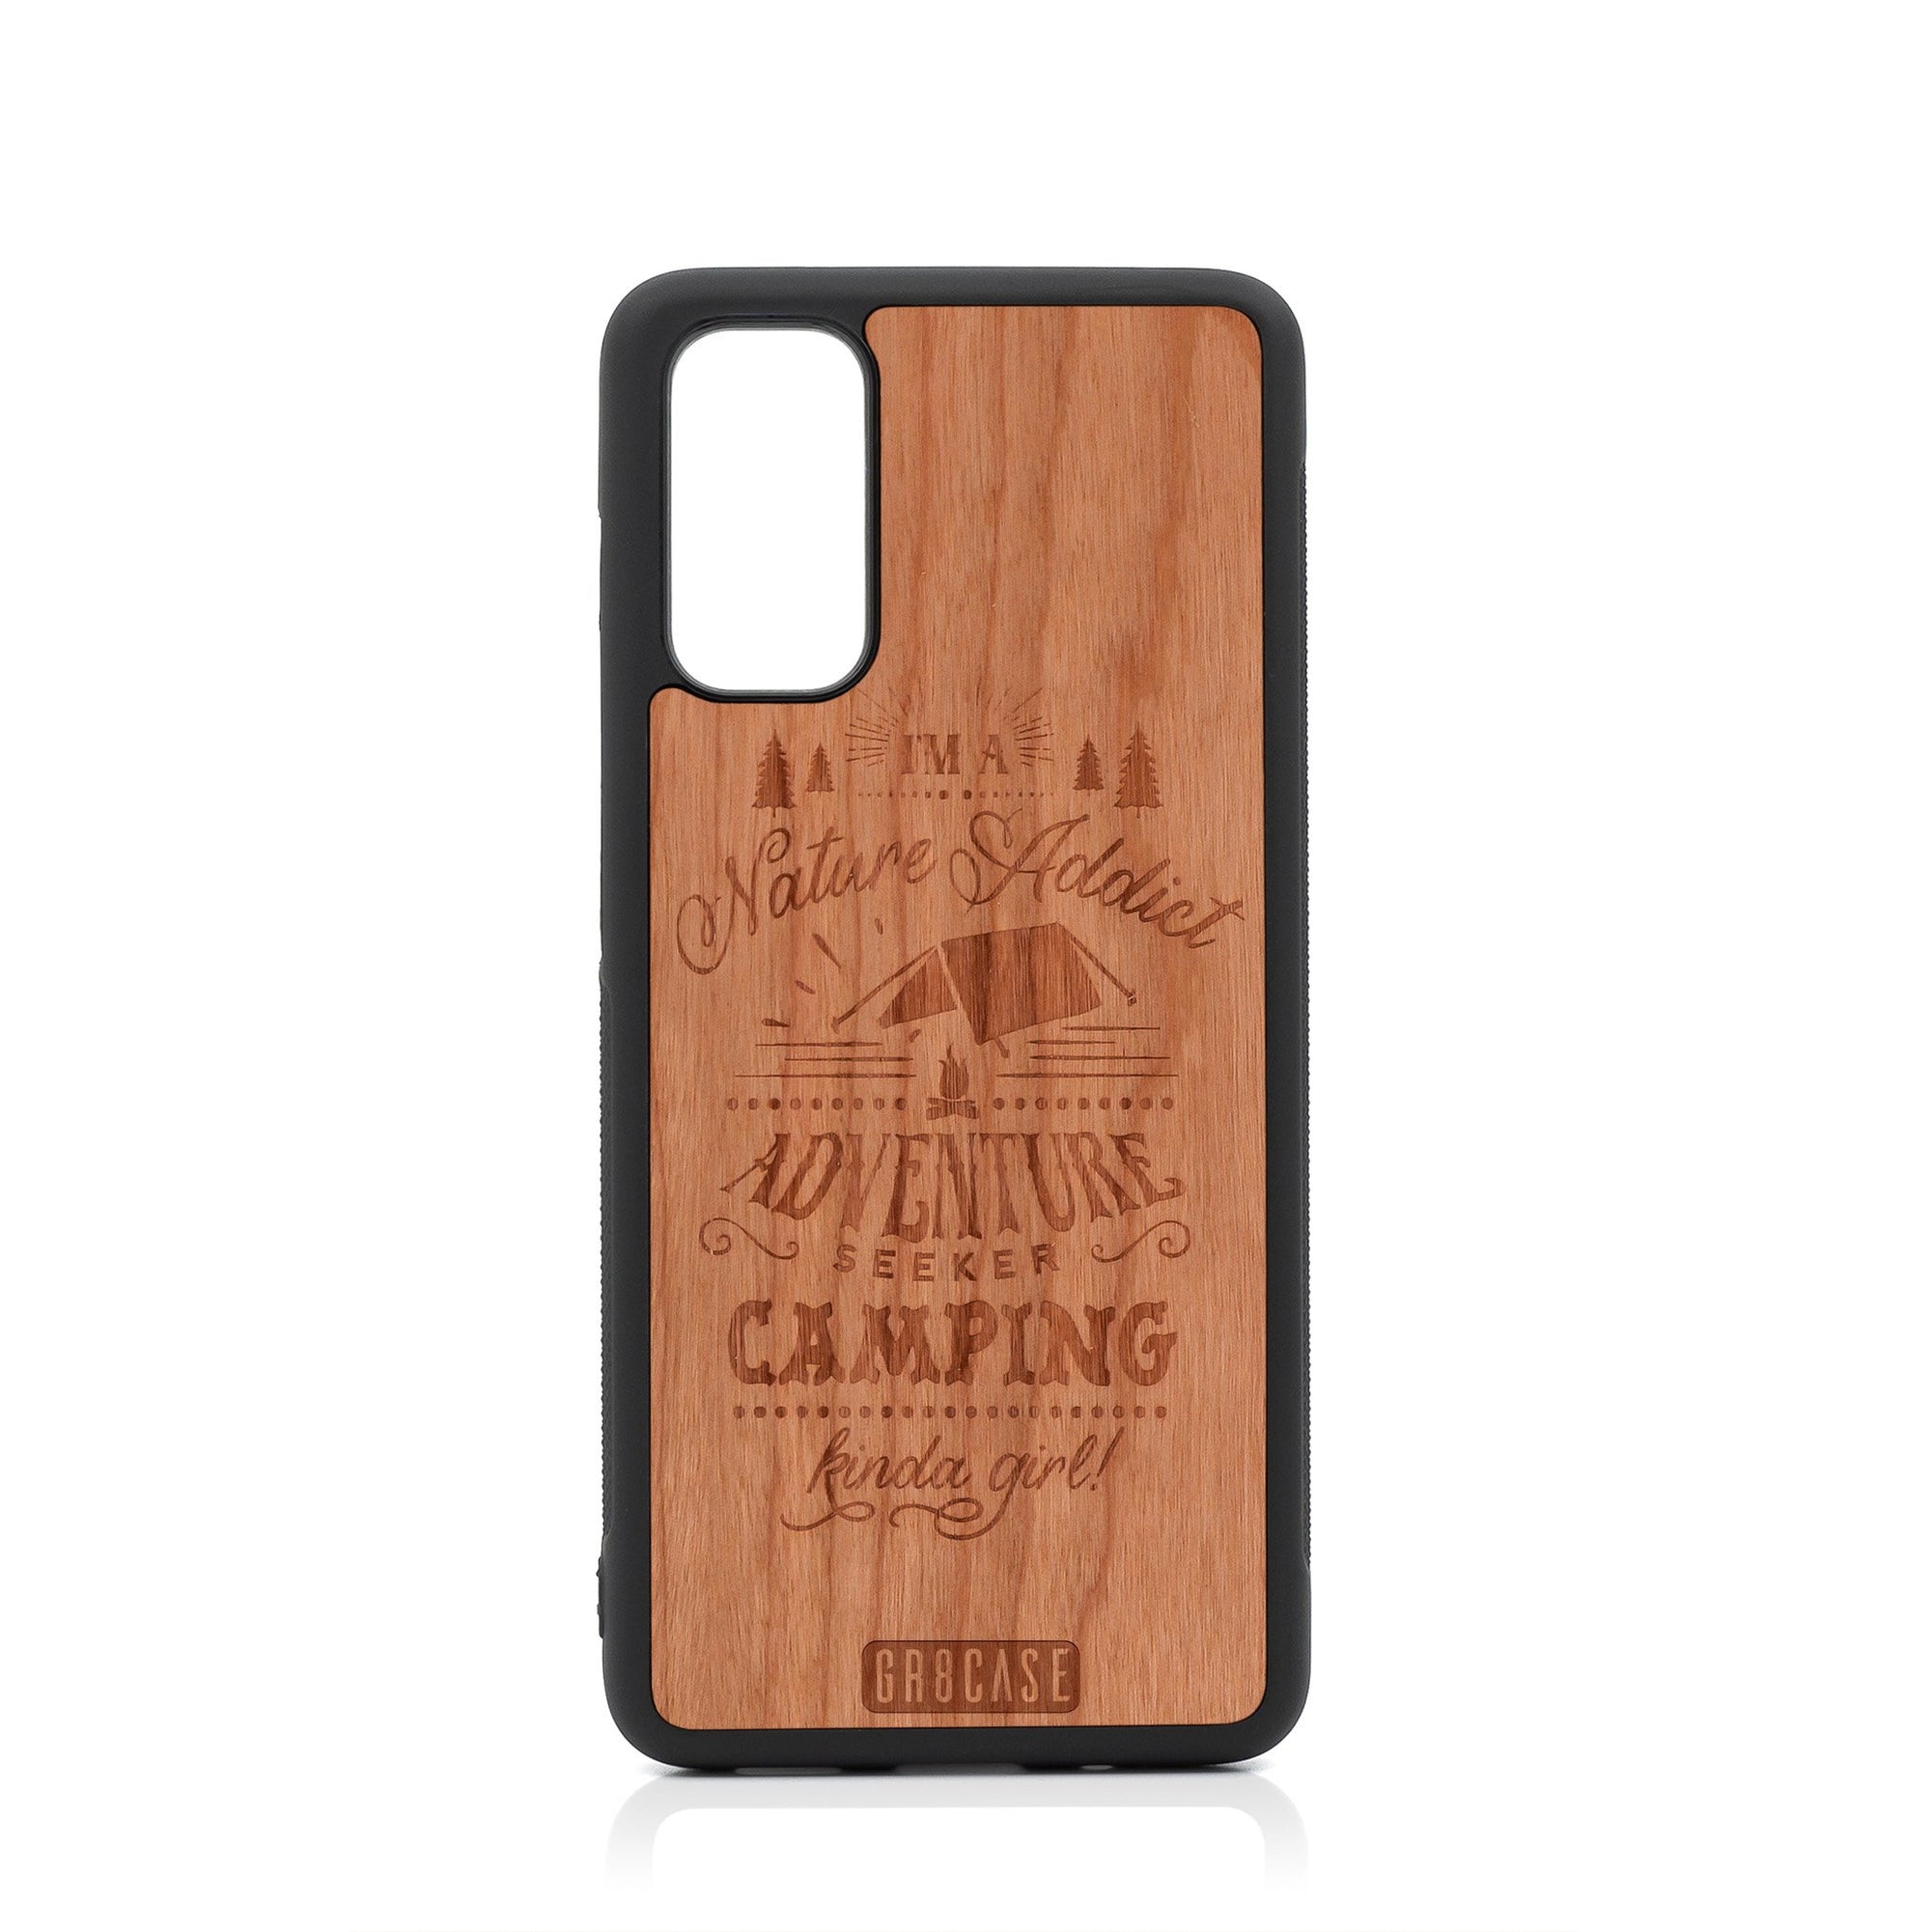 I'm A Nature Addict Adventure Seeker Camping Kinda Girl Design Wood Case For Samsung Galaxy S20 FE 5G by GR8CASE